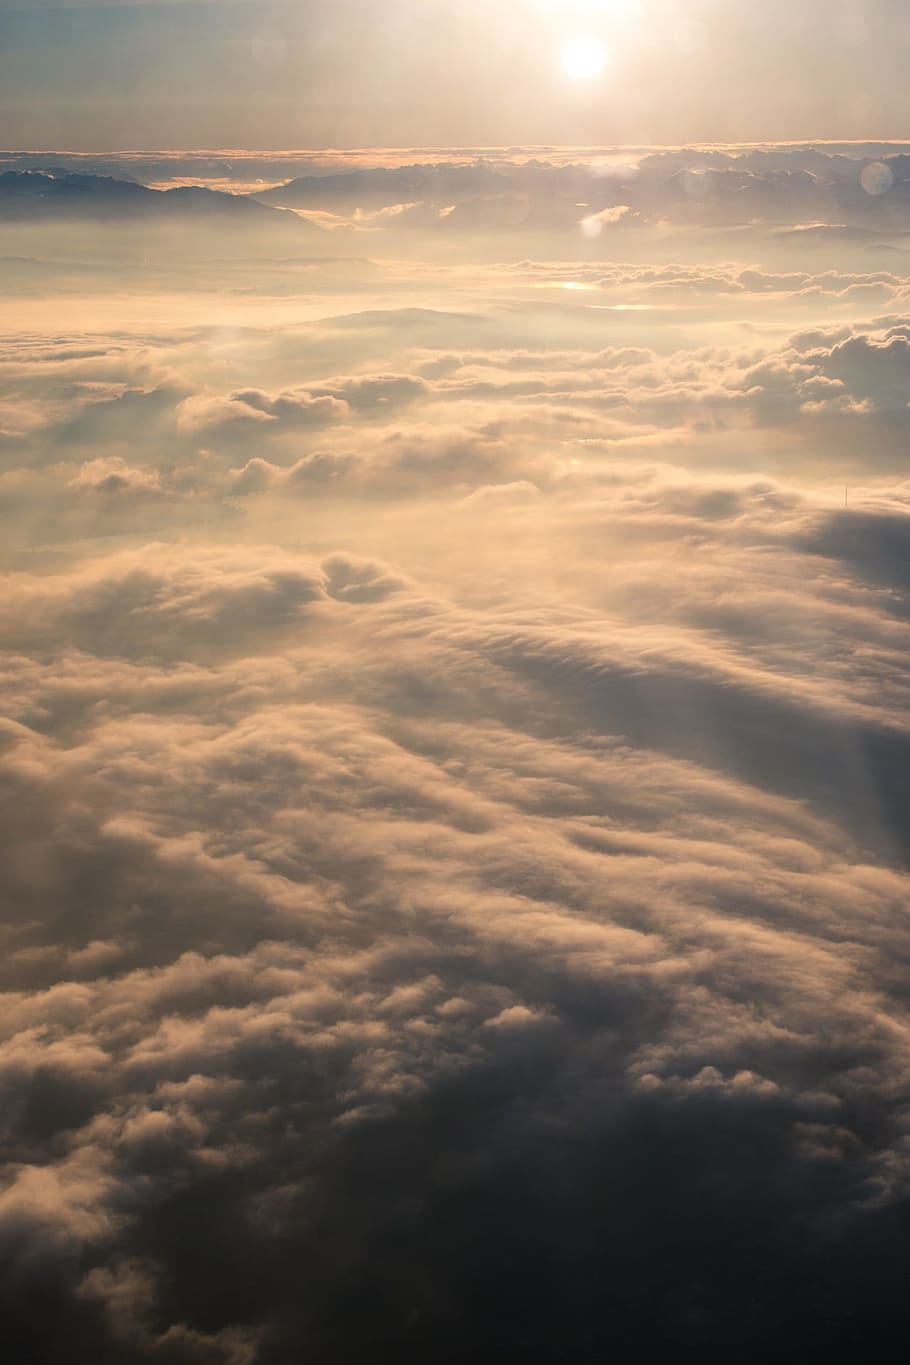 clouds, aircraft, above the clouds, fly, sky, sunrise, lighting, mountains, cloud - sky, beauty in nature